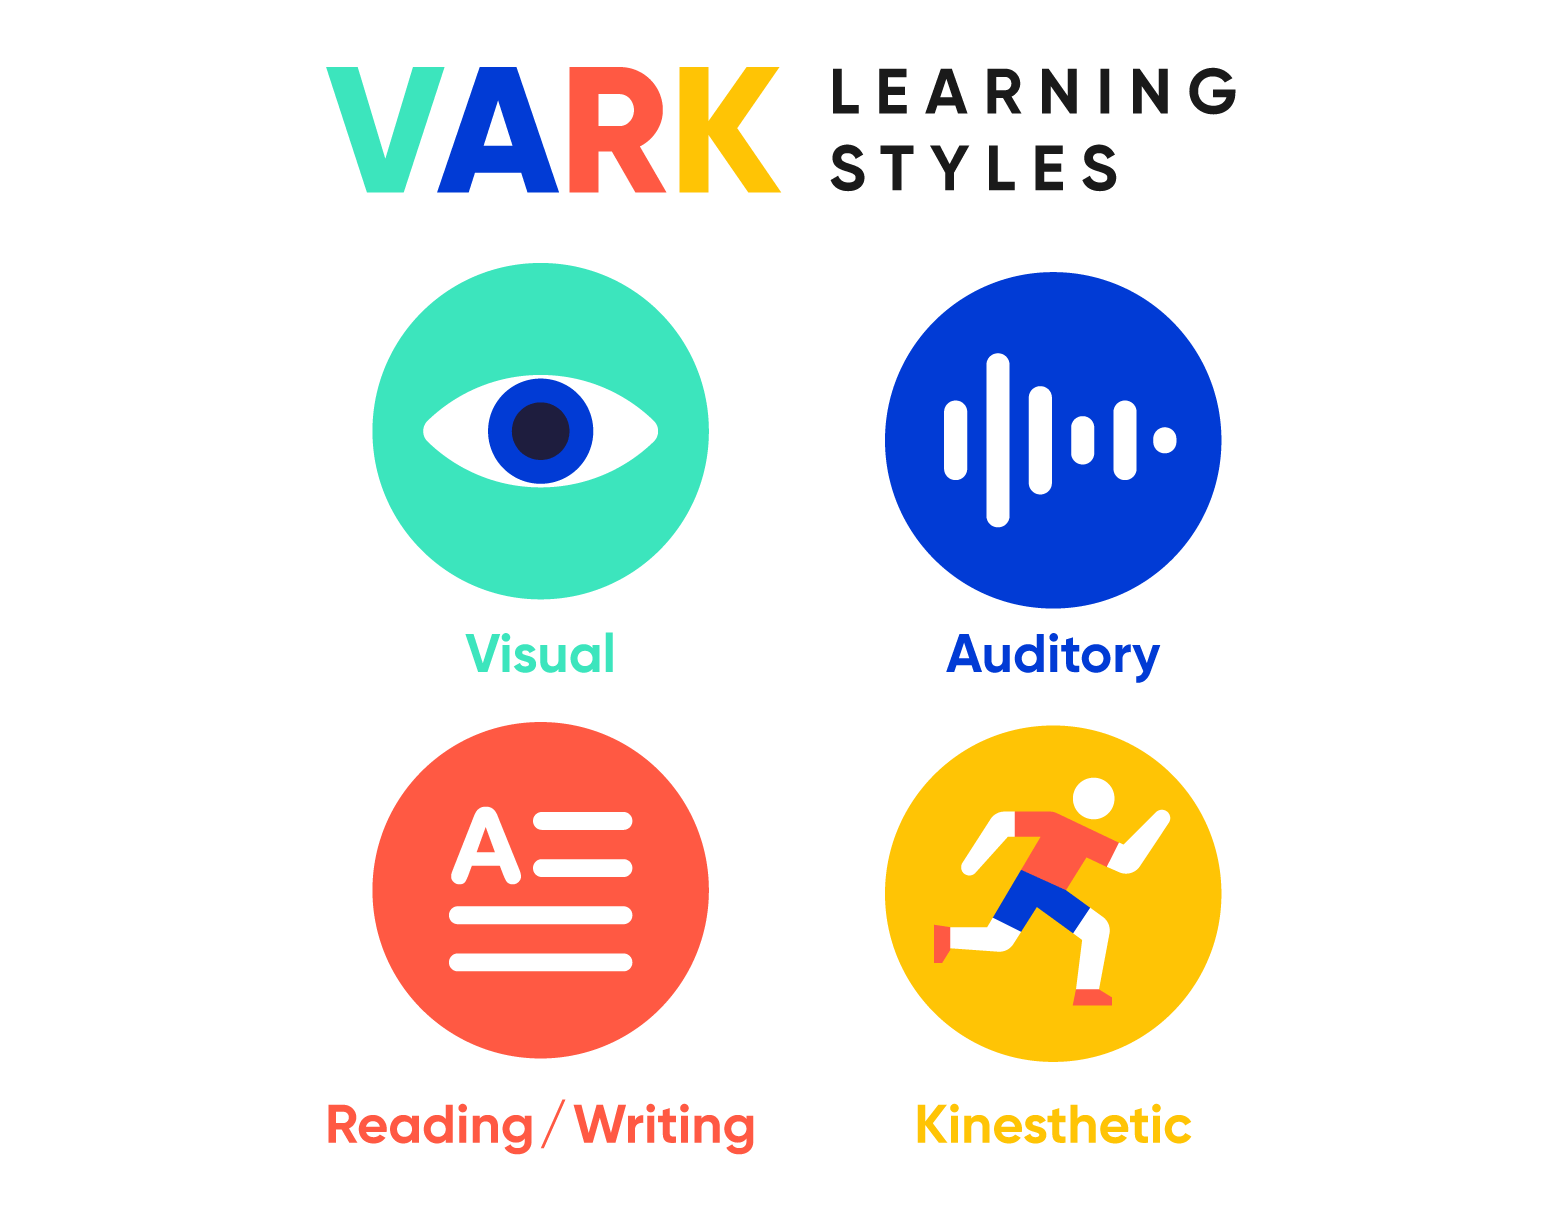 What are the 4 types of learning styles?